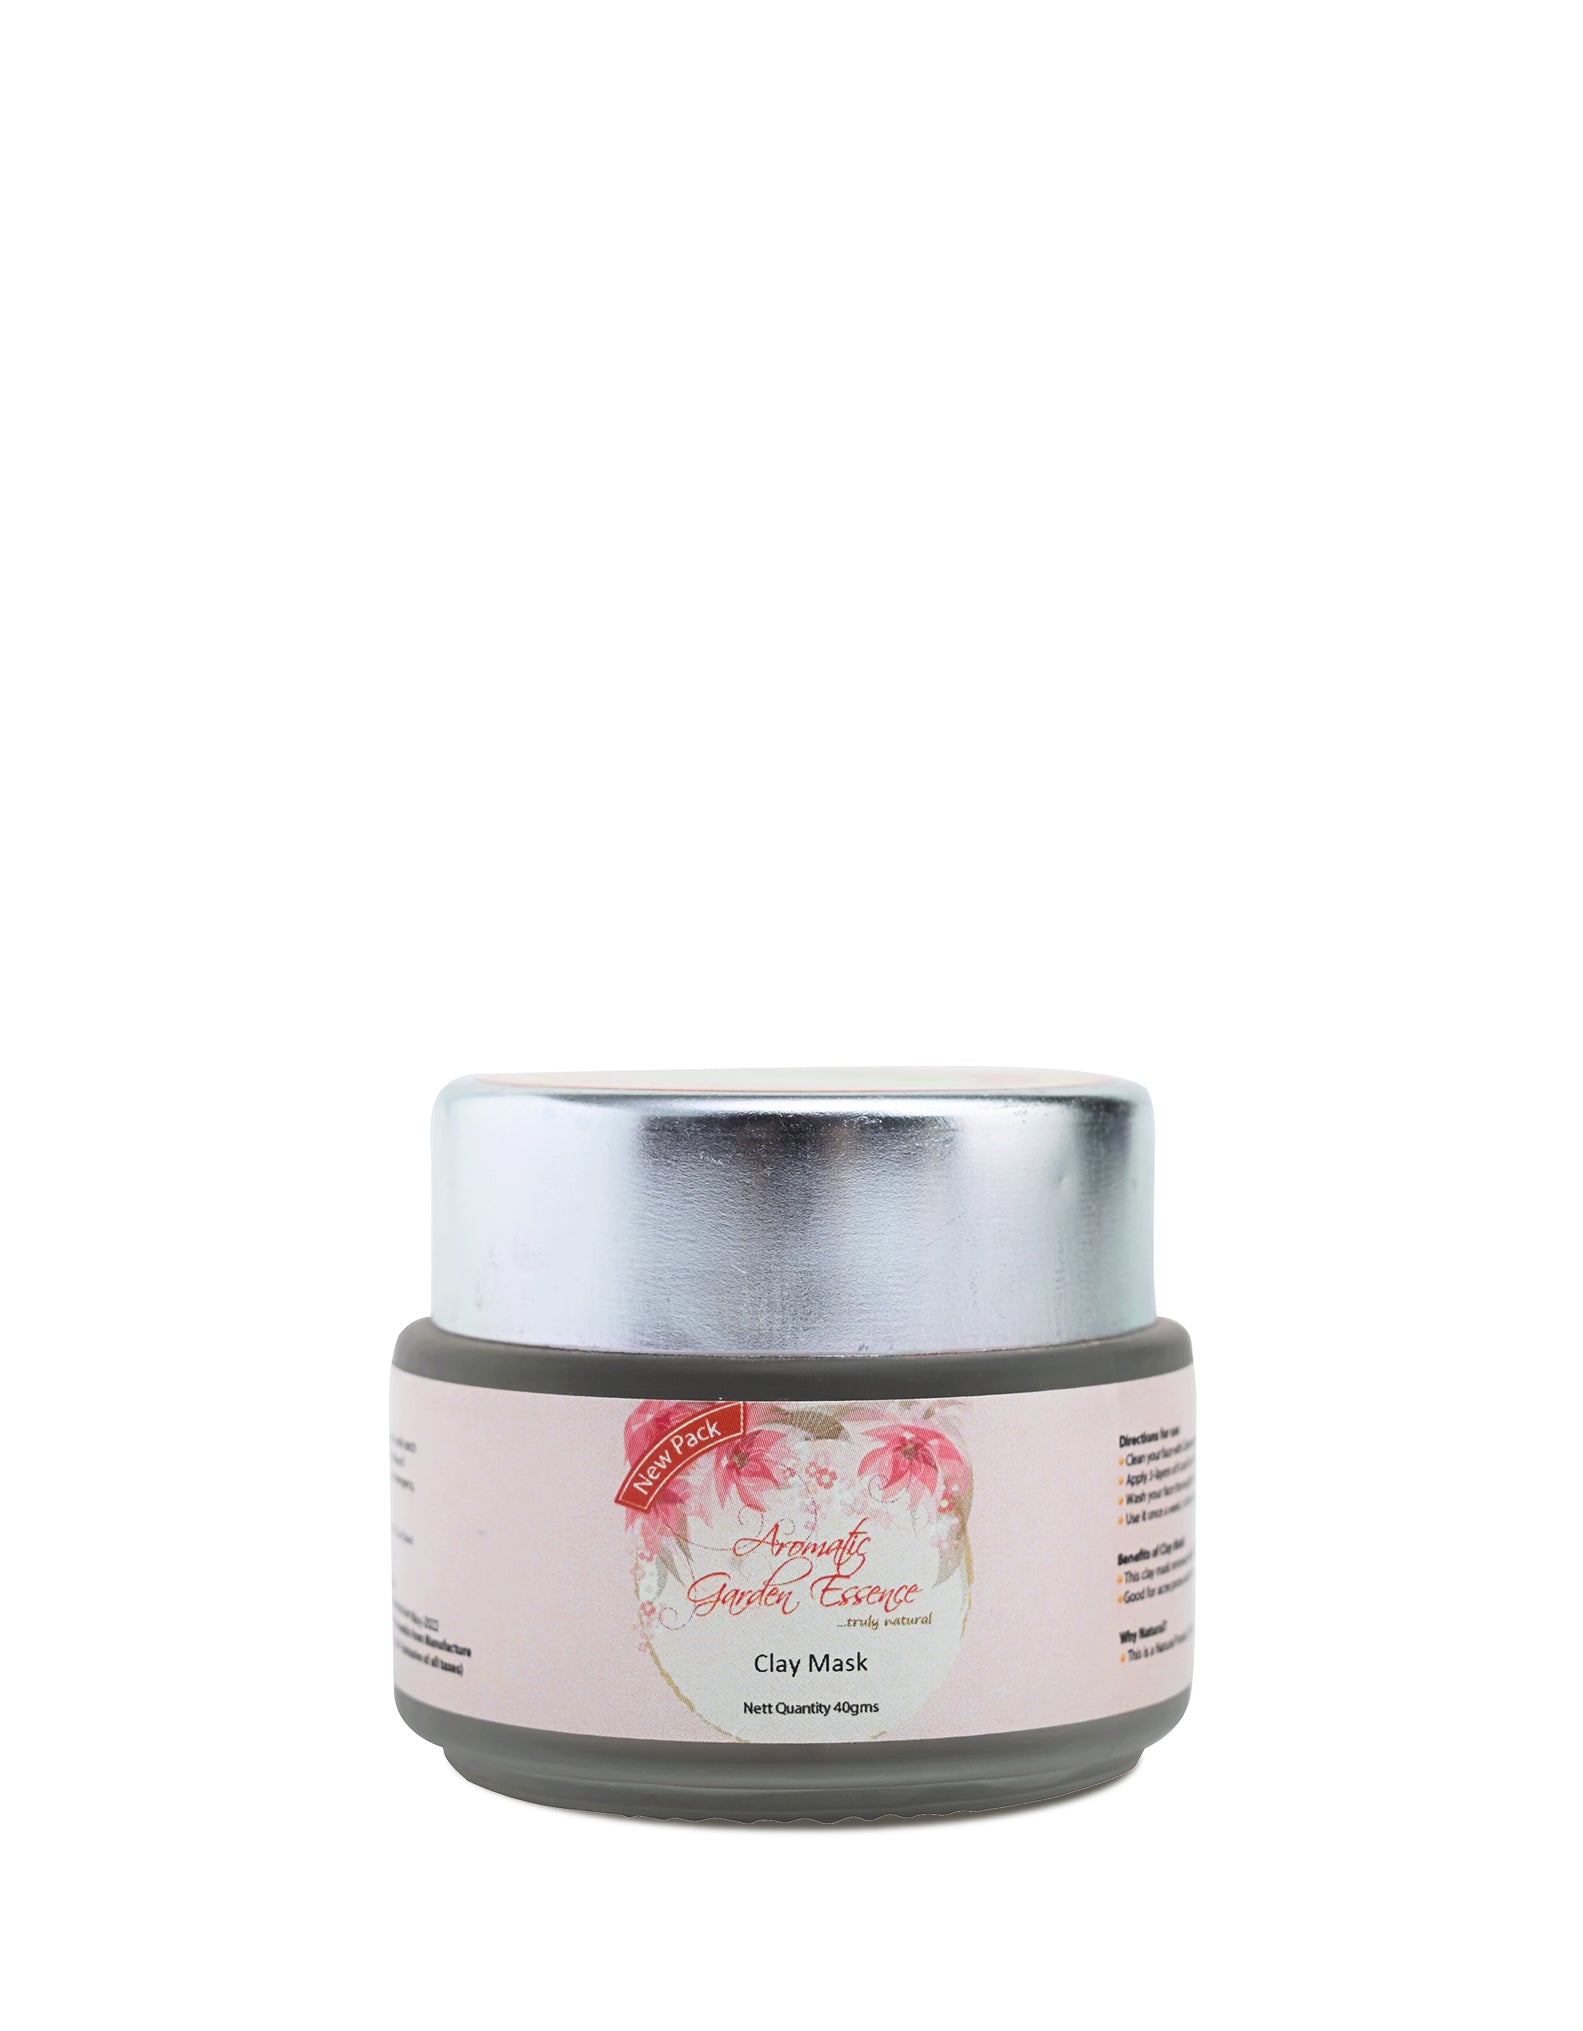 Shop Clay Mask 40 gm Online